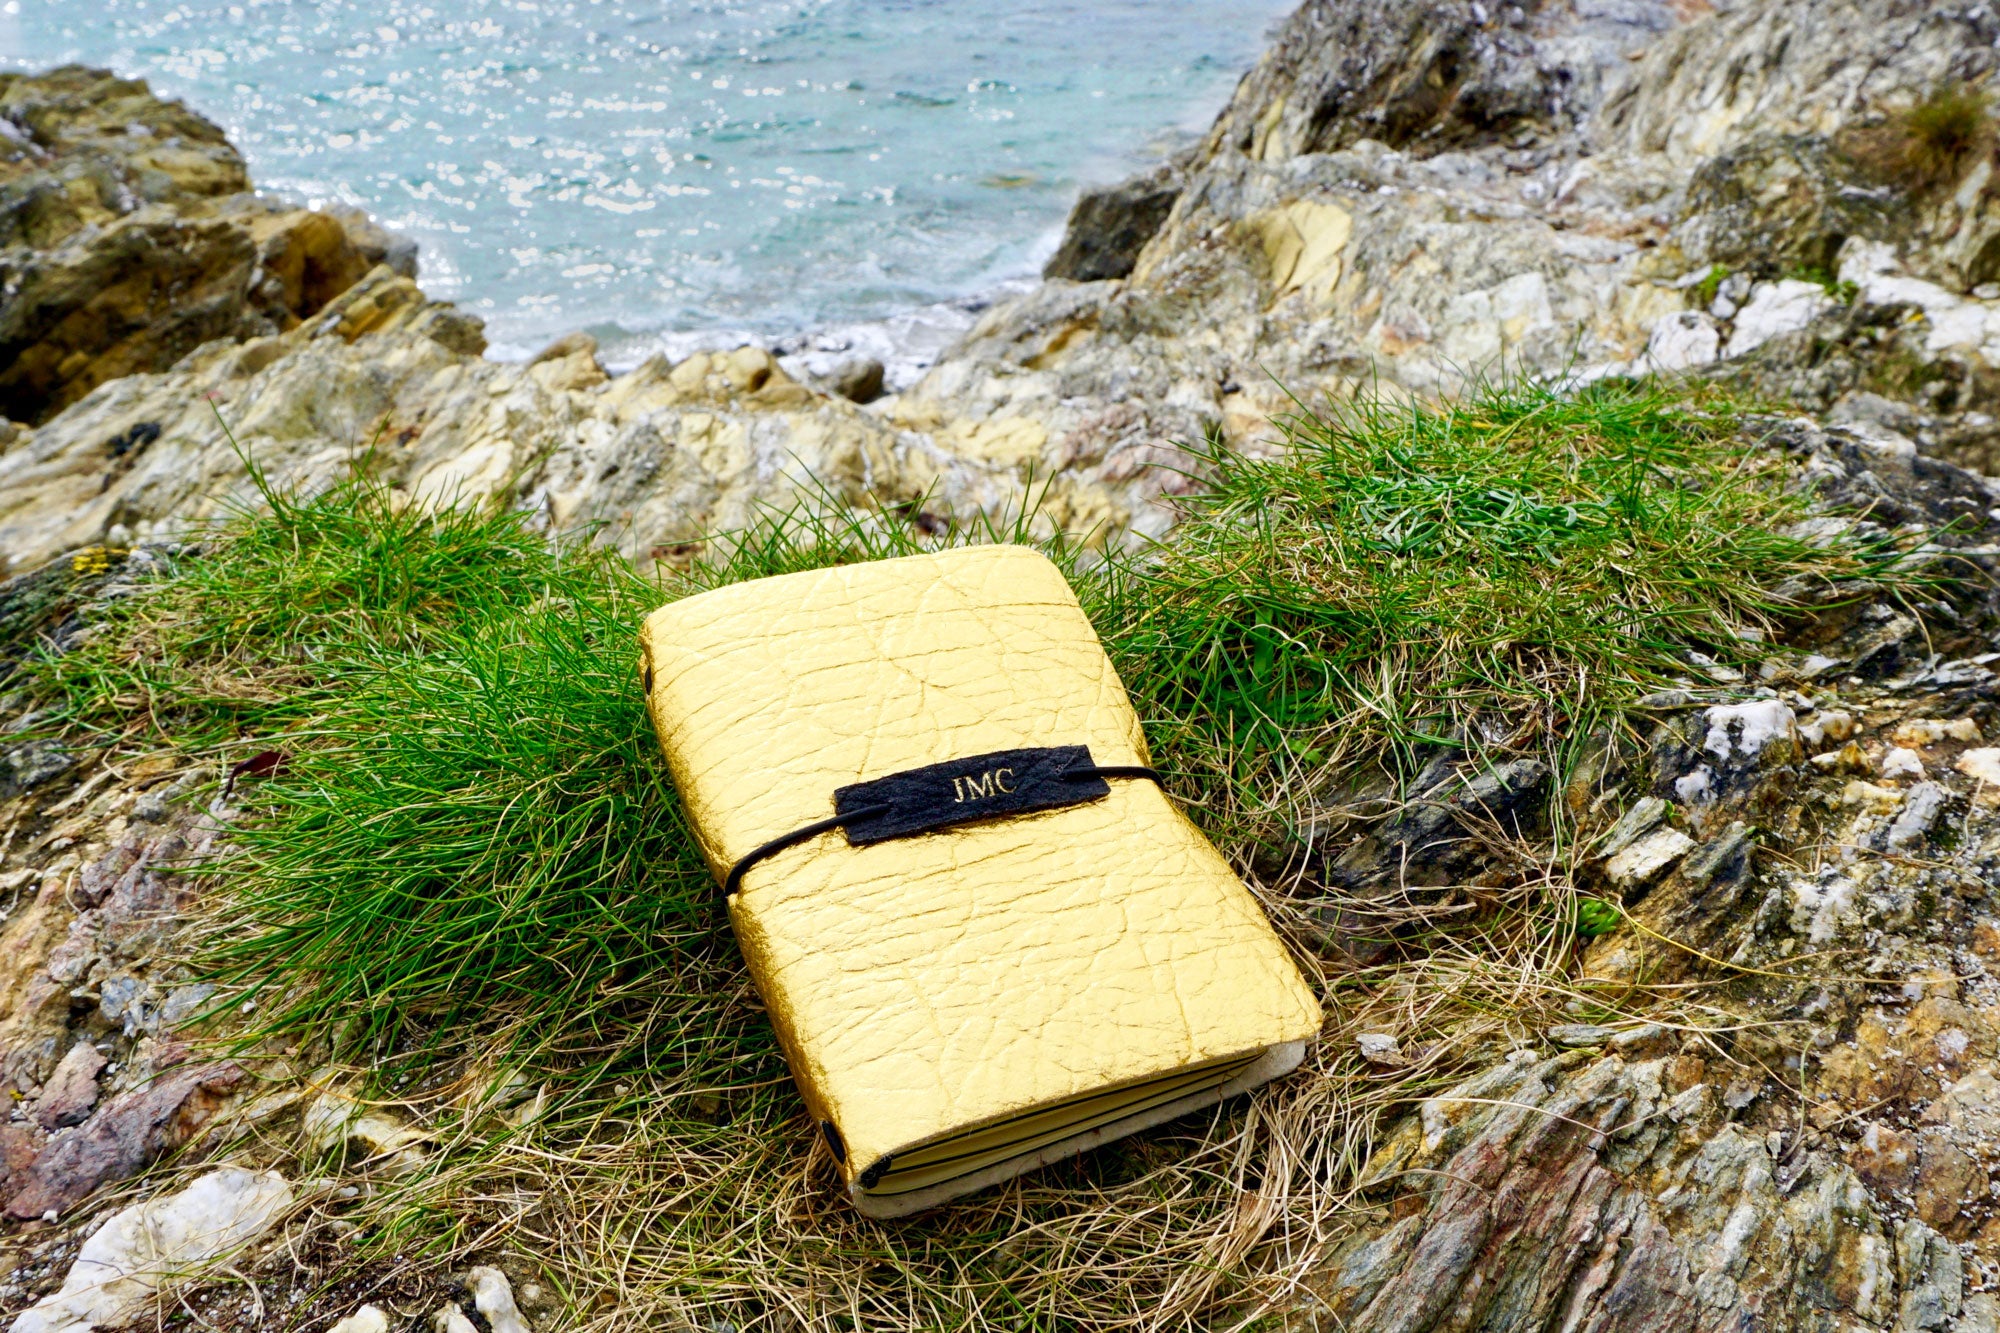 This is our gold textured Vegan Leather Journal photographed here at the edge of a cliff